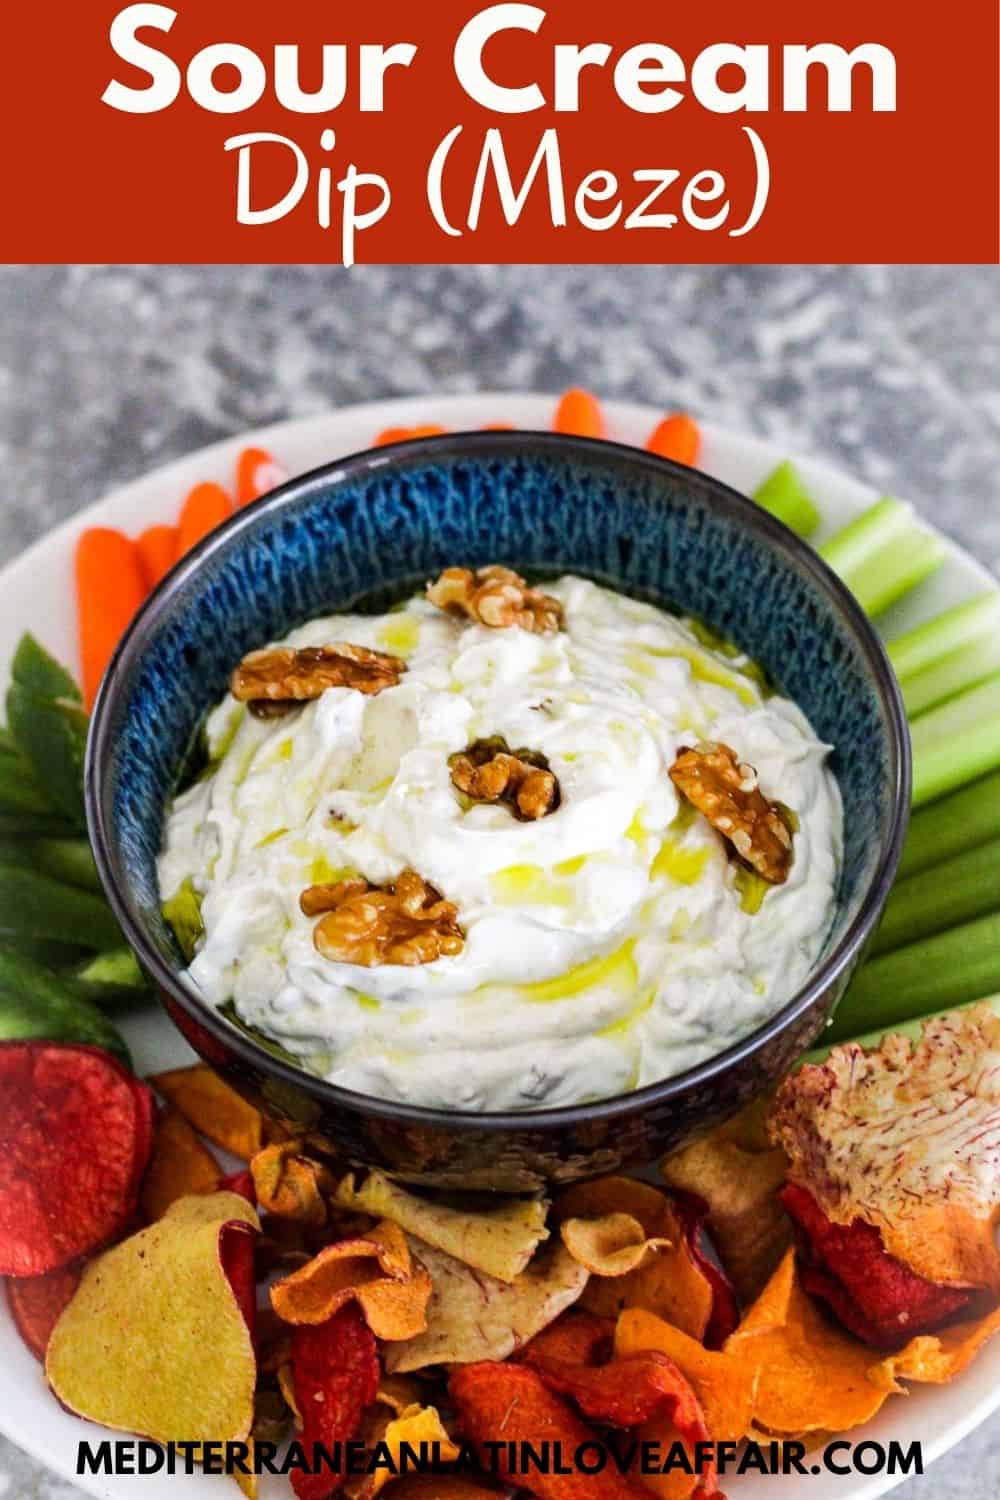 An image prepared specifically for Pinterest. It shows the image of the sour cream dip in the middle, a title bar on top and the website link on the bottom.